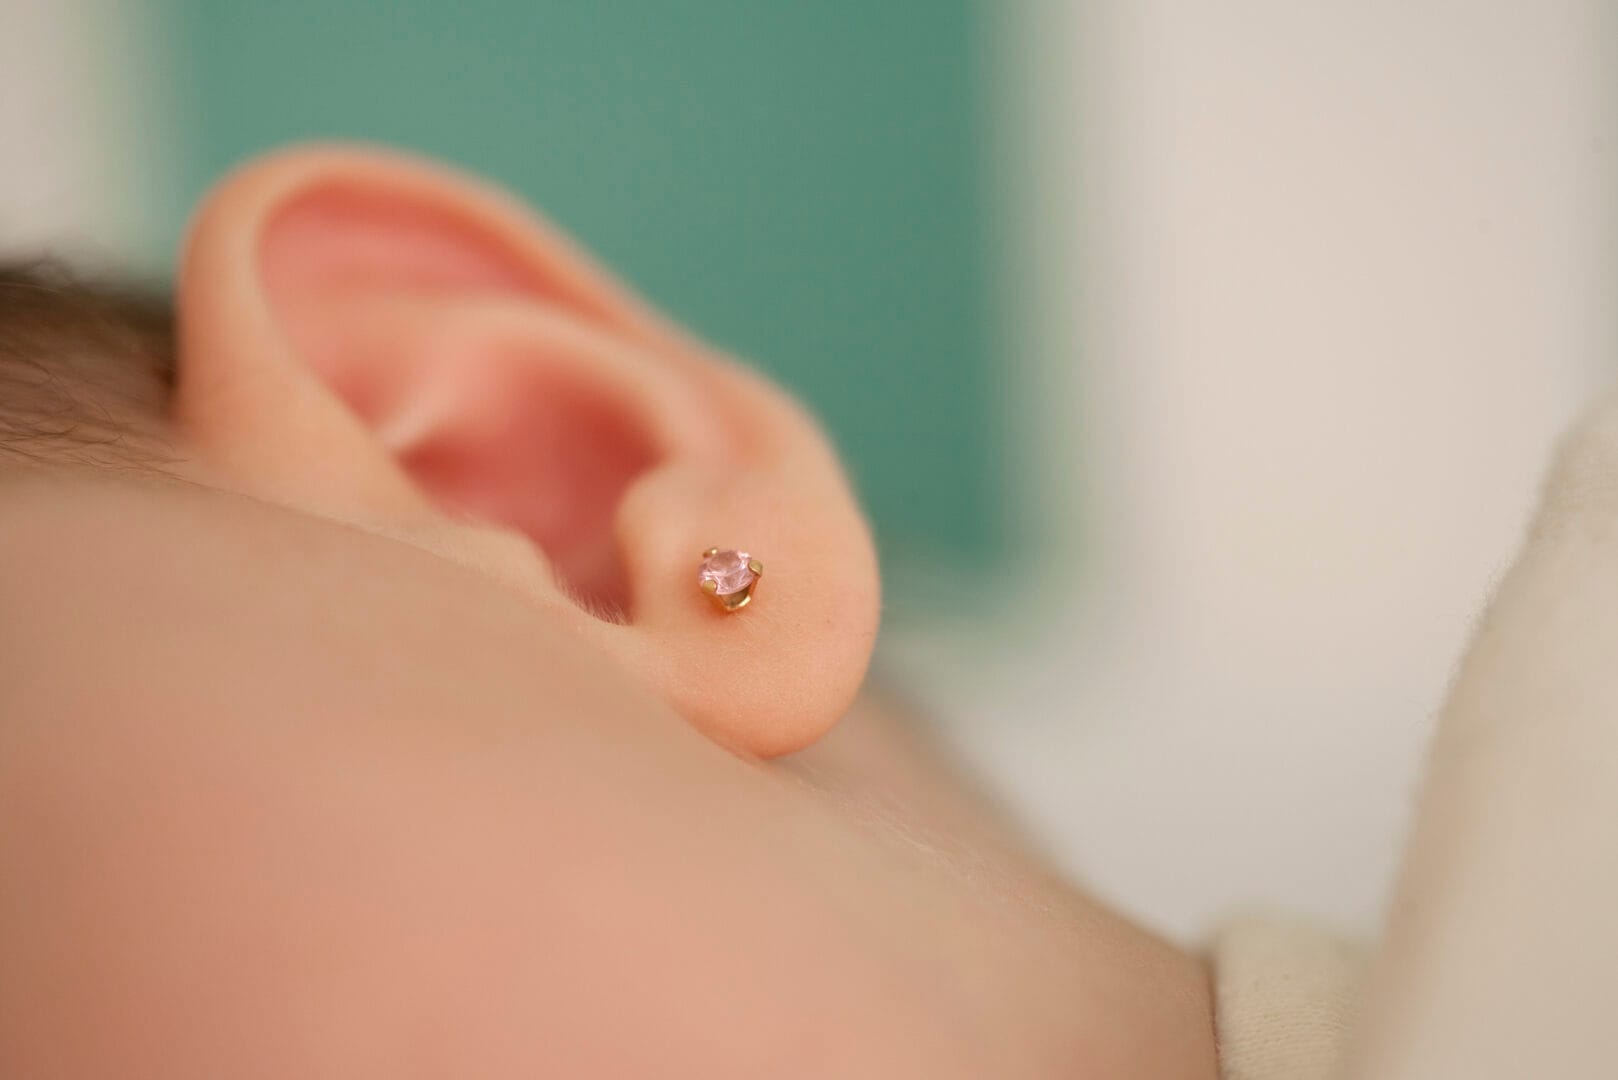 Do pediatricians pierce ears? Yes, but you may have a hard time finding one